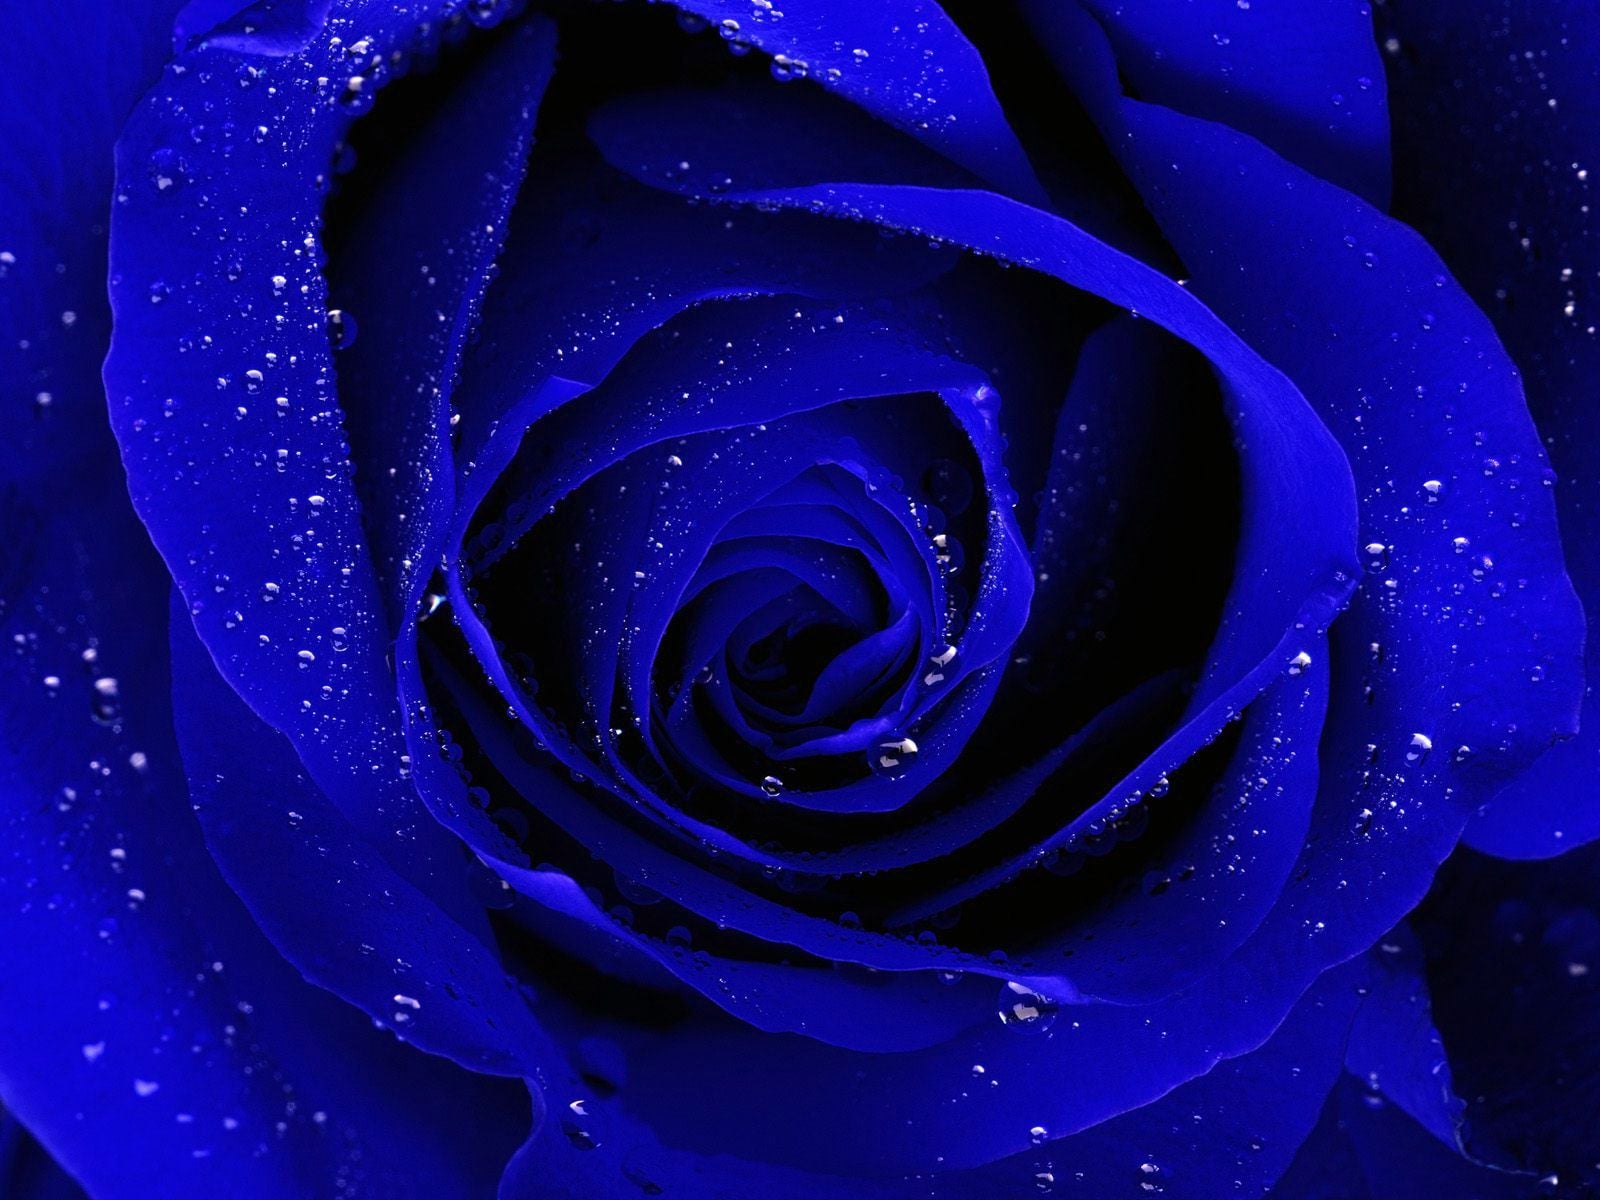 Free download Blue Rose Wallpaper Images amp Pictures Becuo [1600x1200